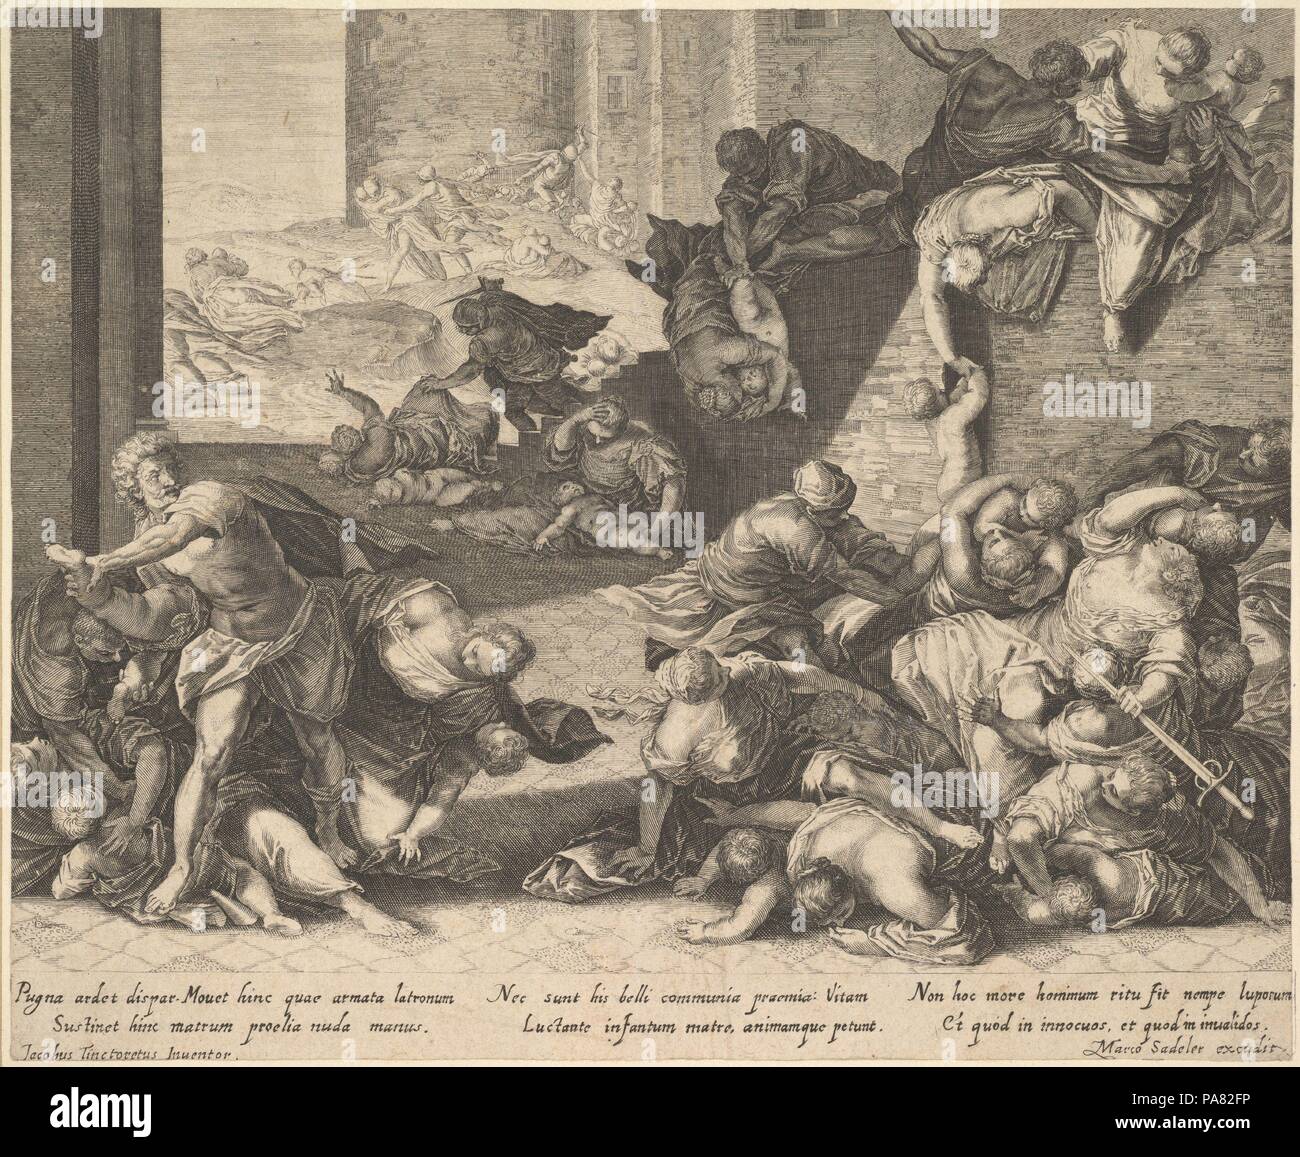 Massacre of the Innocents. Artist: Anonymous; After Jacopo Tintoretto (Jacopo Robusti) (Italian, Venice 1518/19-1594 Venice). Dimensions: Sheet (Trimmed): 8 1/4 × 10 1/16 in. (21 × 25.6 cm)  Mount: 9 5/8 × 11 3/4 in. (24.5 × 29.8 cm). Publisher: Marcus Sadeler (German, Munich before 1614-in or after 1650). Date: 1600--1629. Museum: Metropolitan Museum of Art, New York, USA. Stock Photo